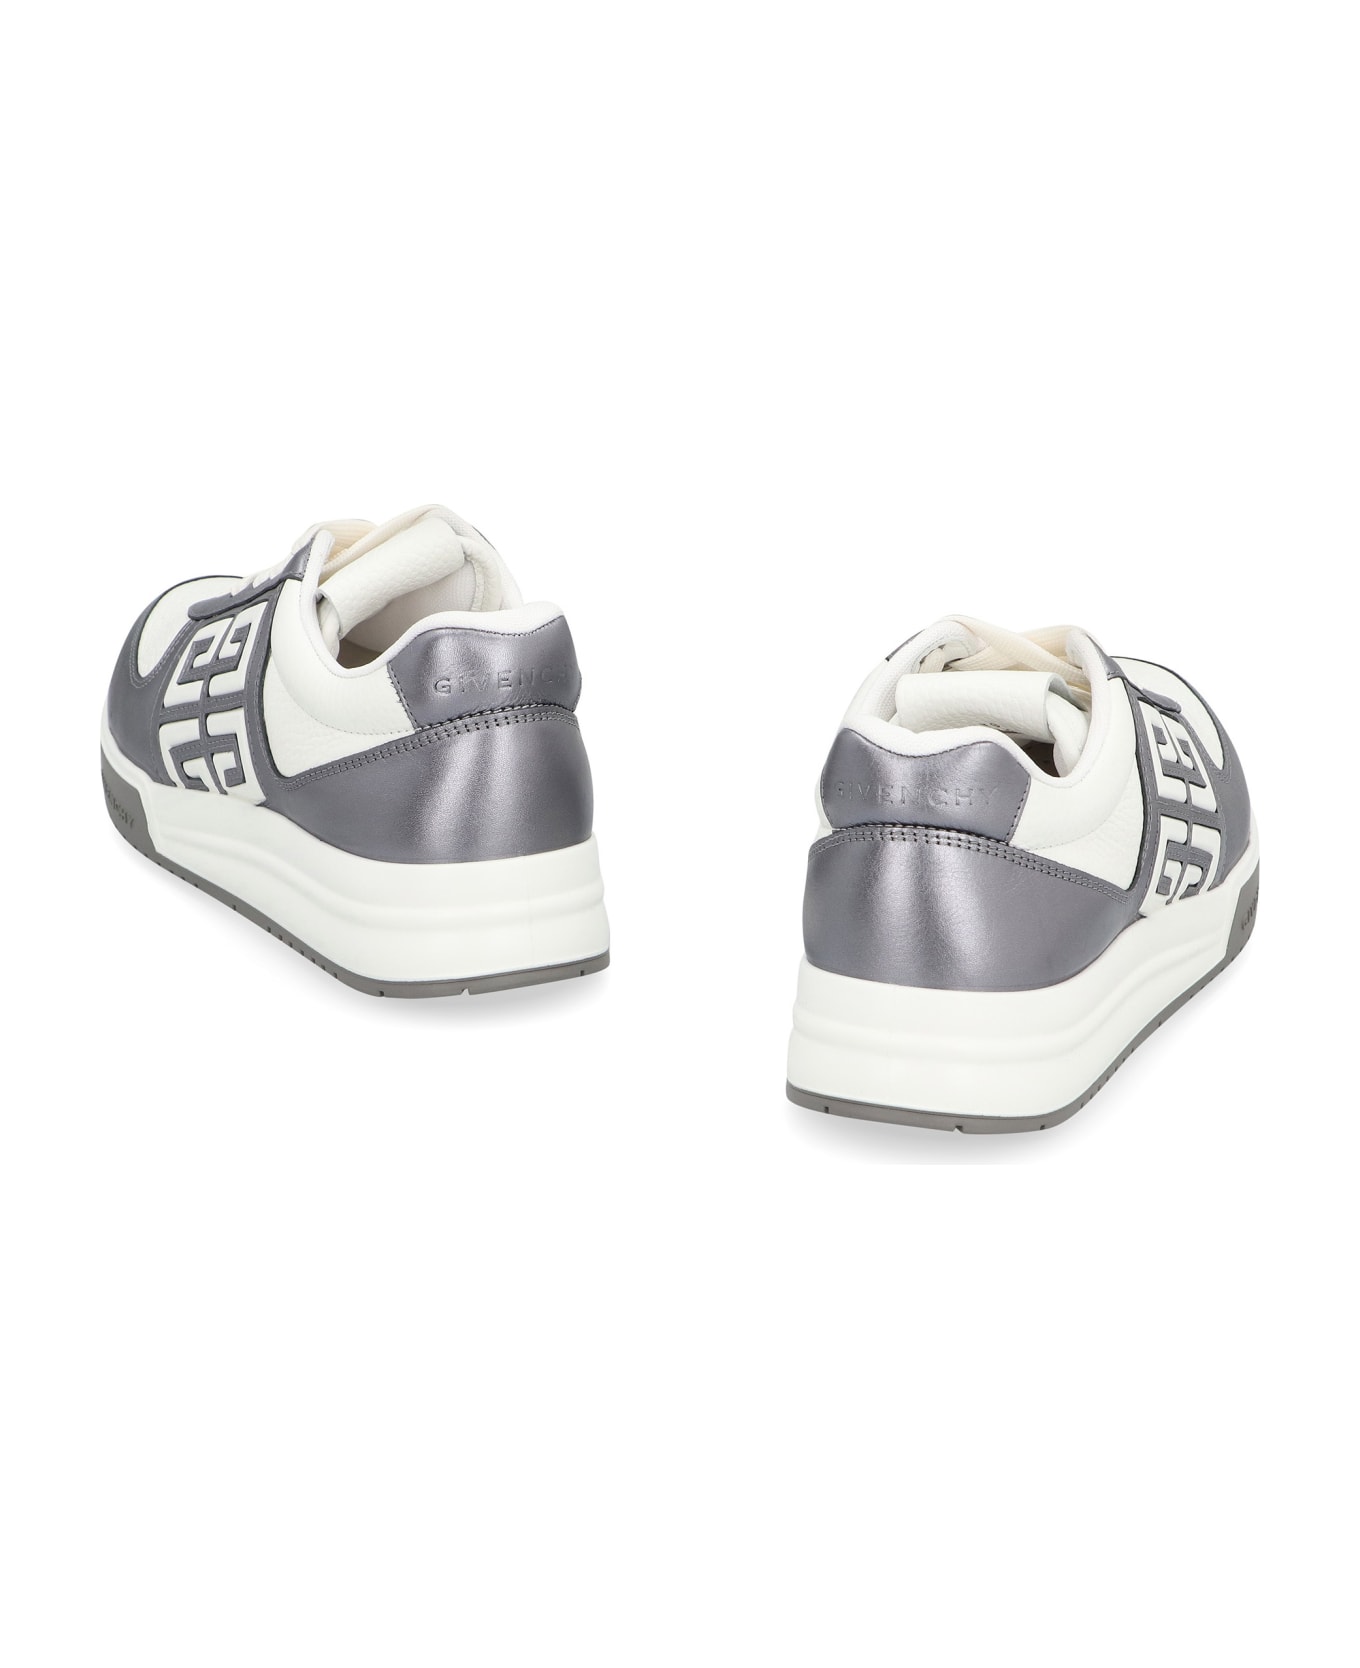 Givenchy G4 Woman's Sneakers - White スニーカー